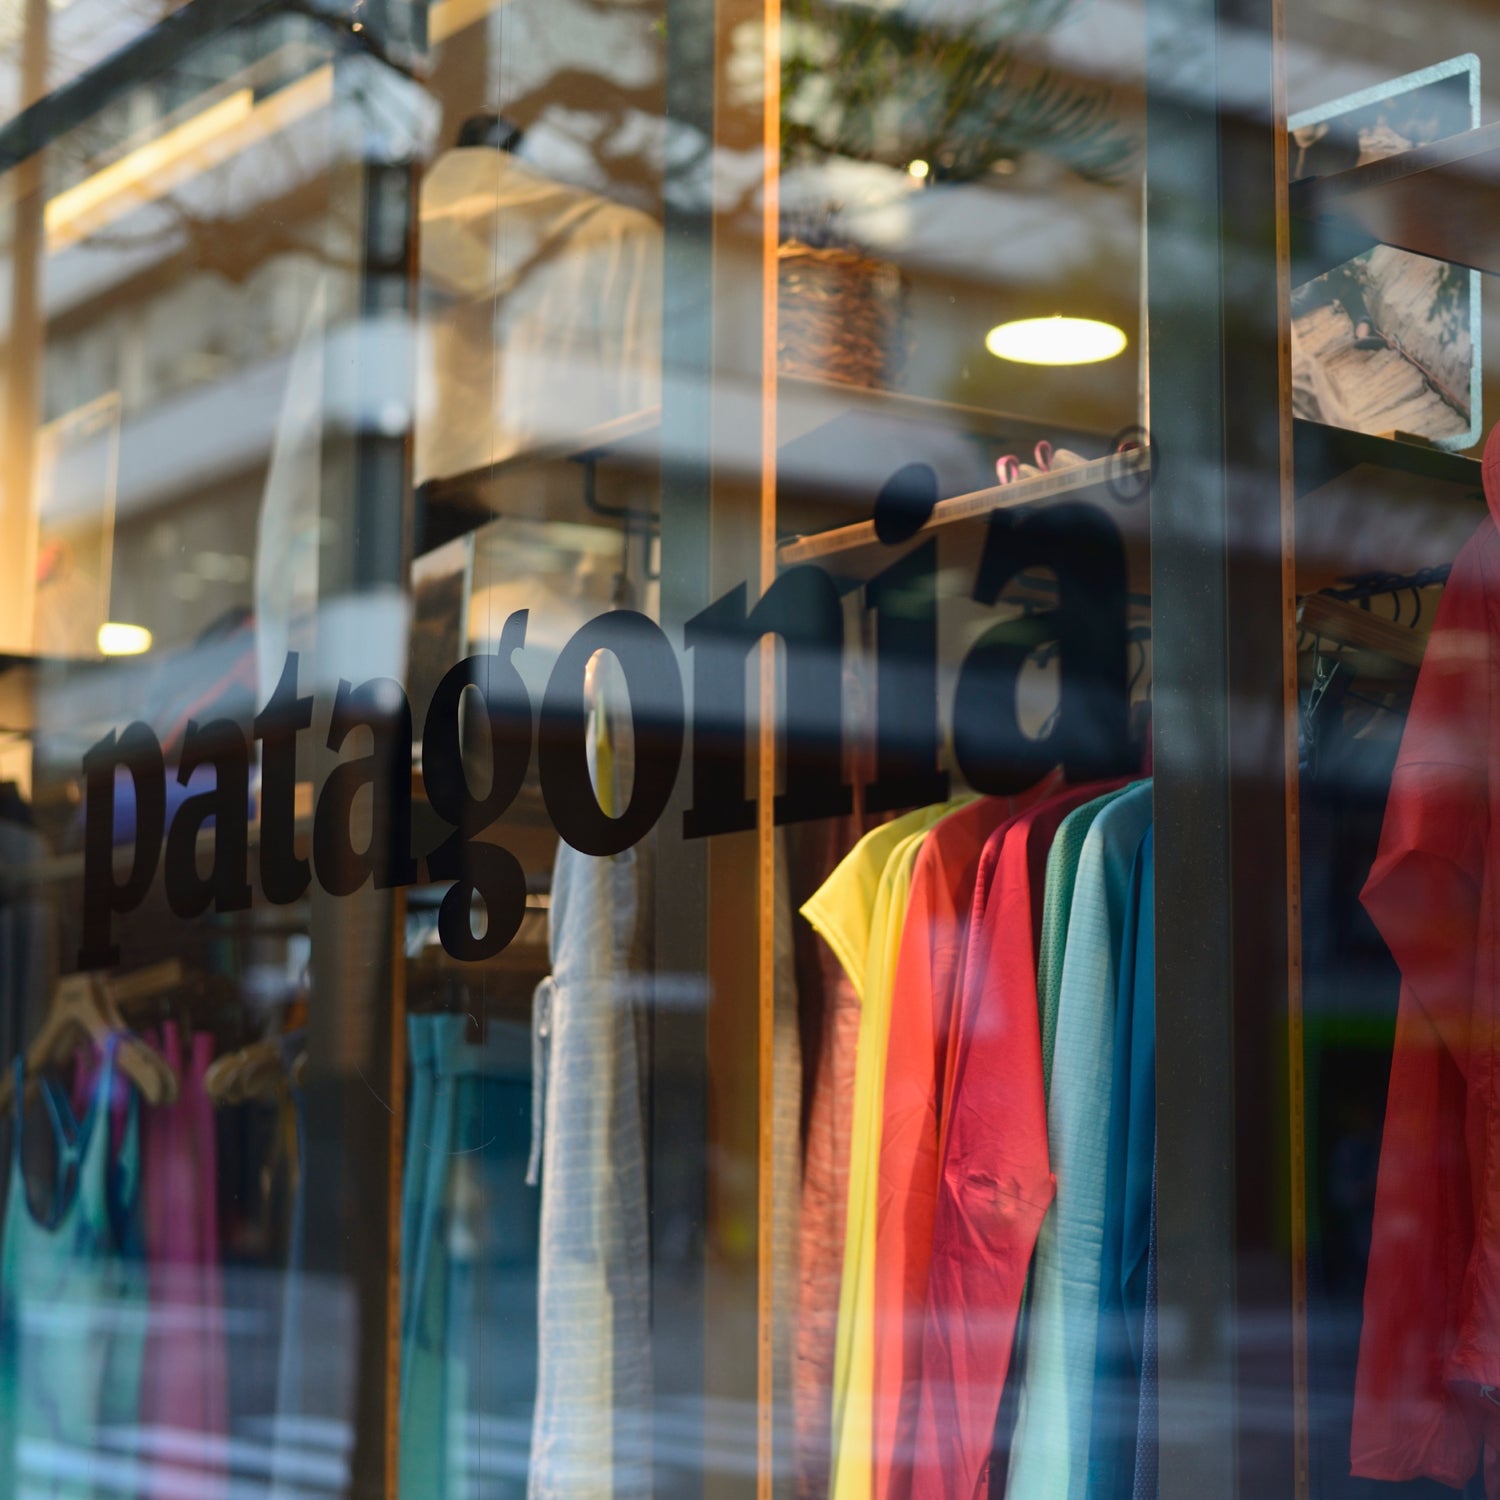 Case Study: Patagonia's Shell, Yeah! Digital Campaign